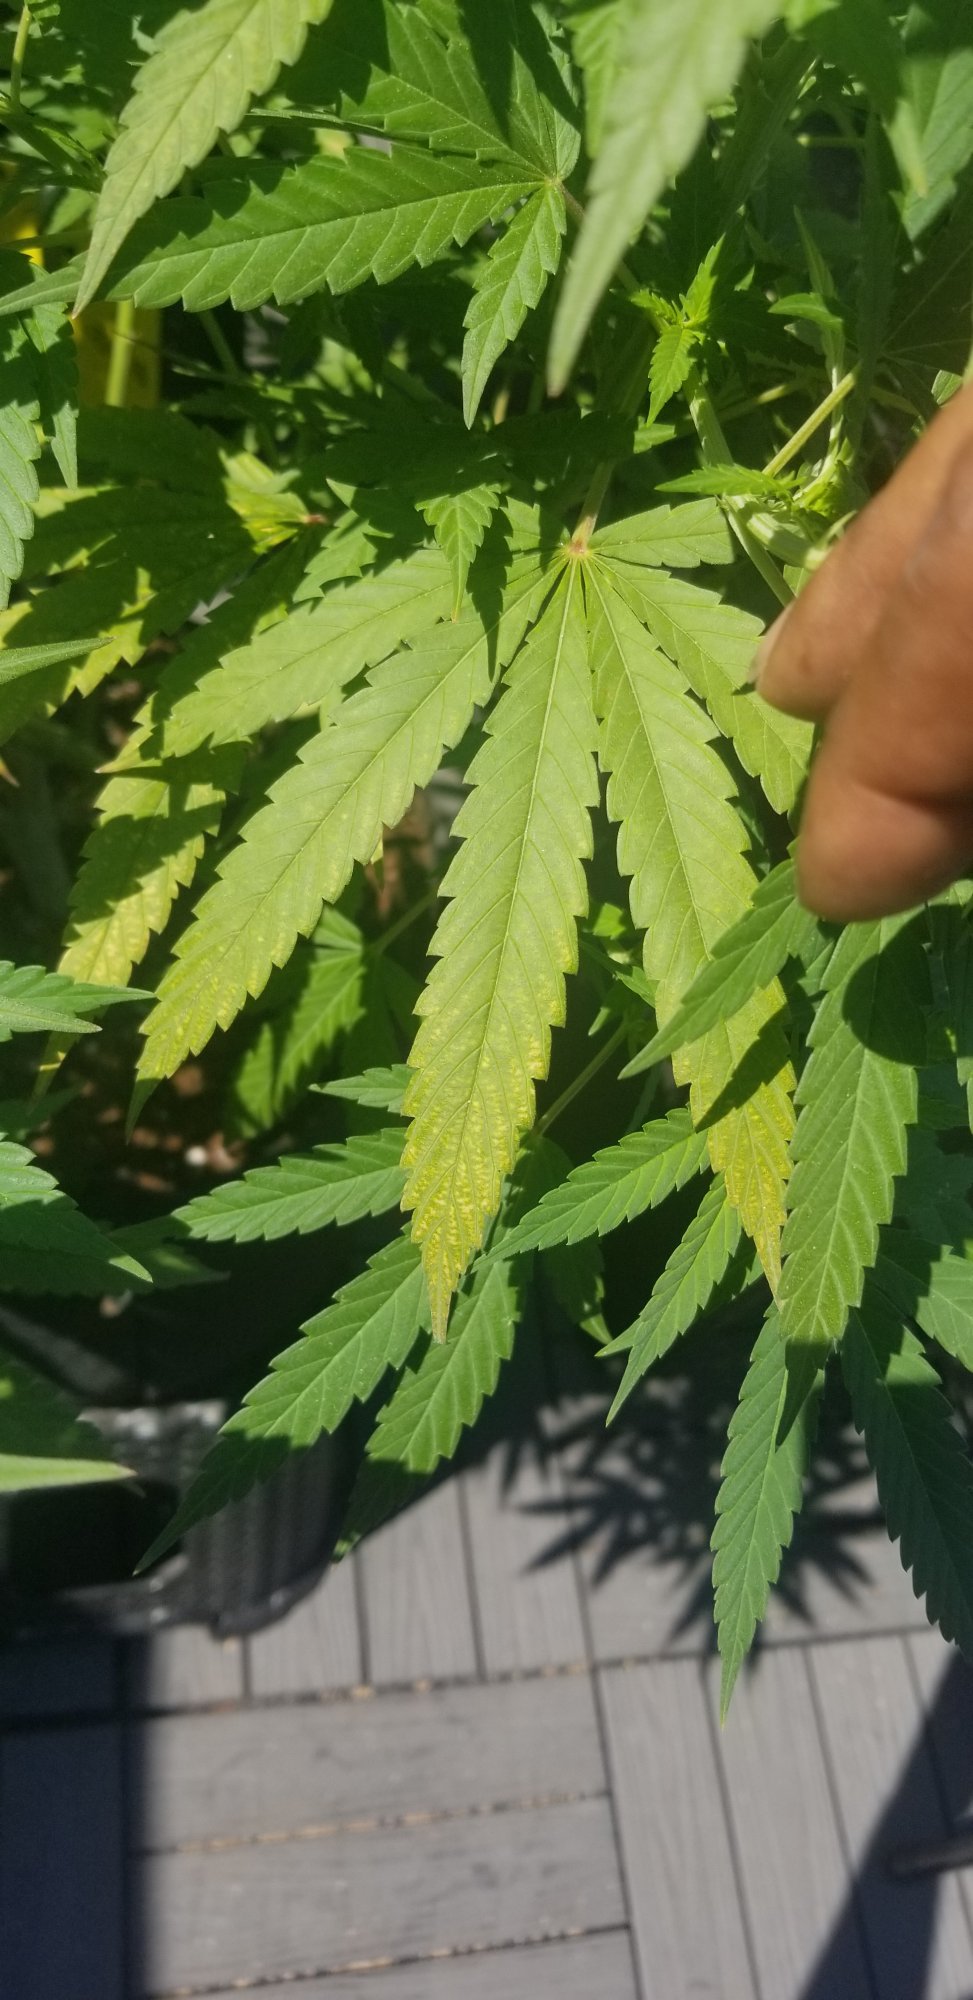 Any idea if this happening to my leaves because of a deficiency or pest